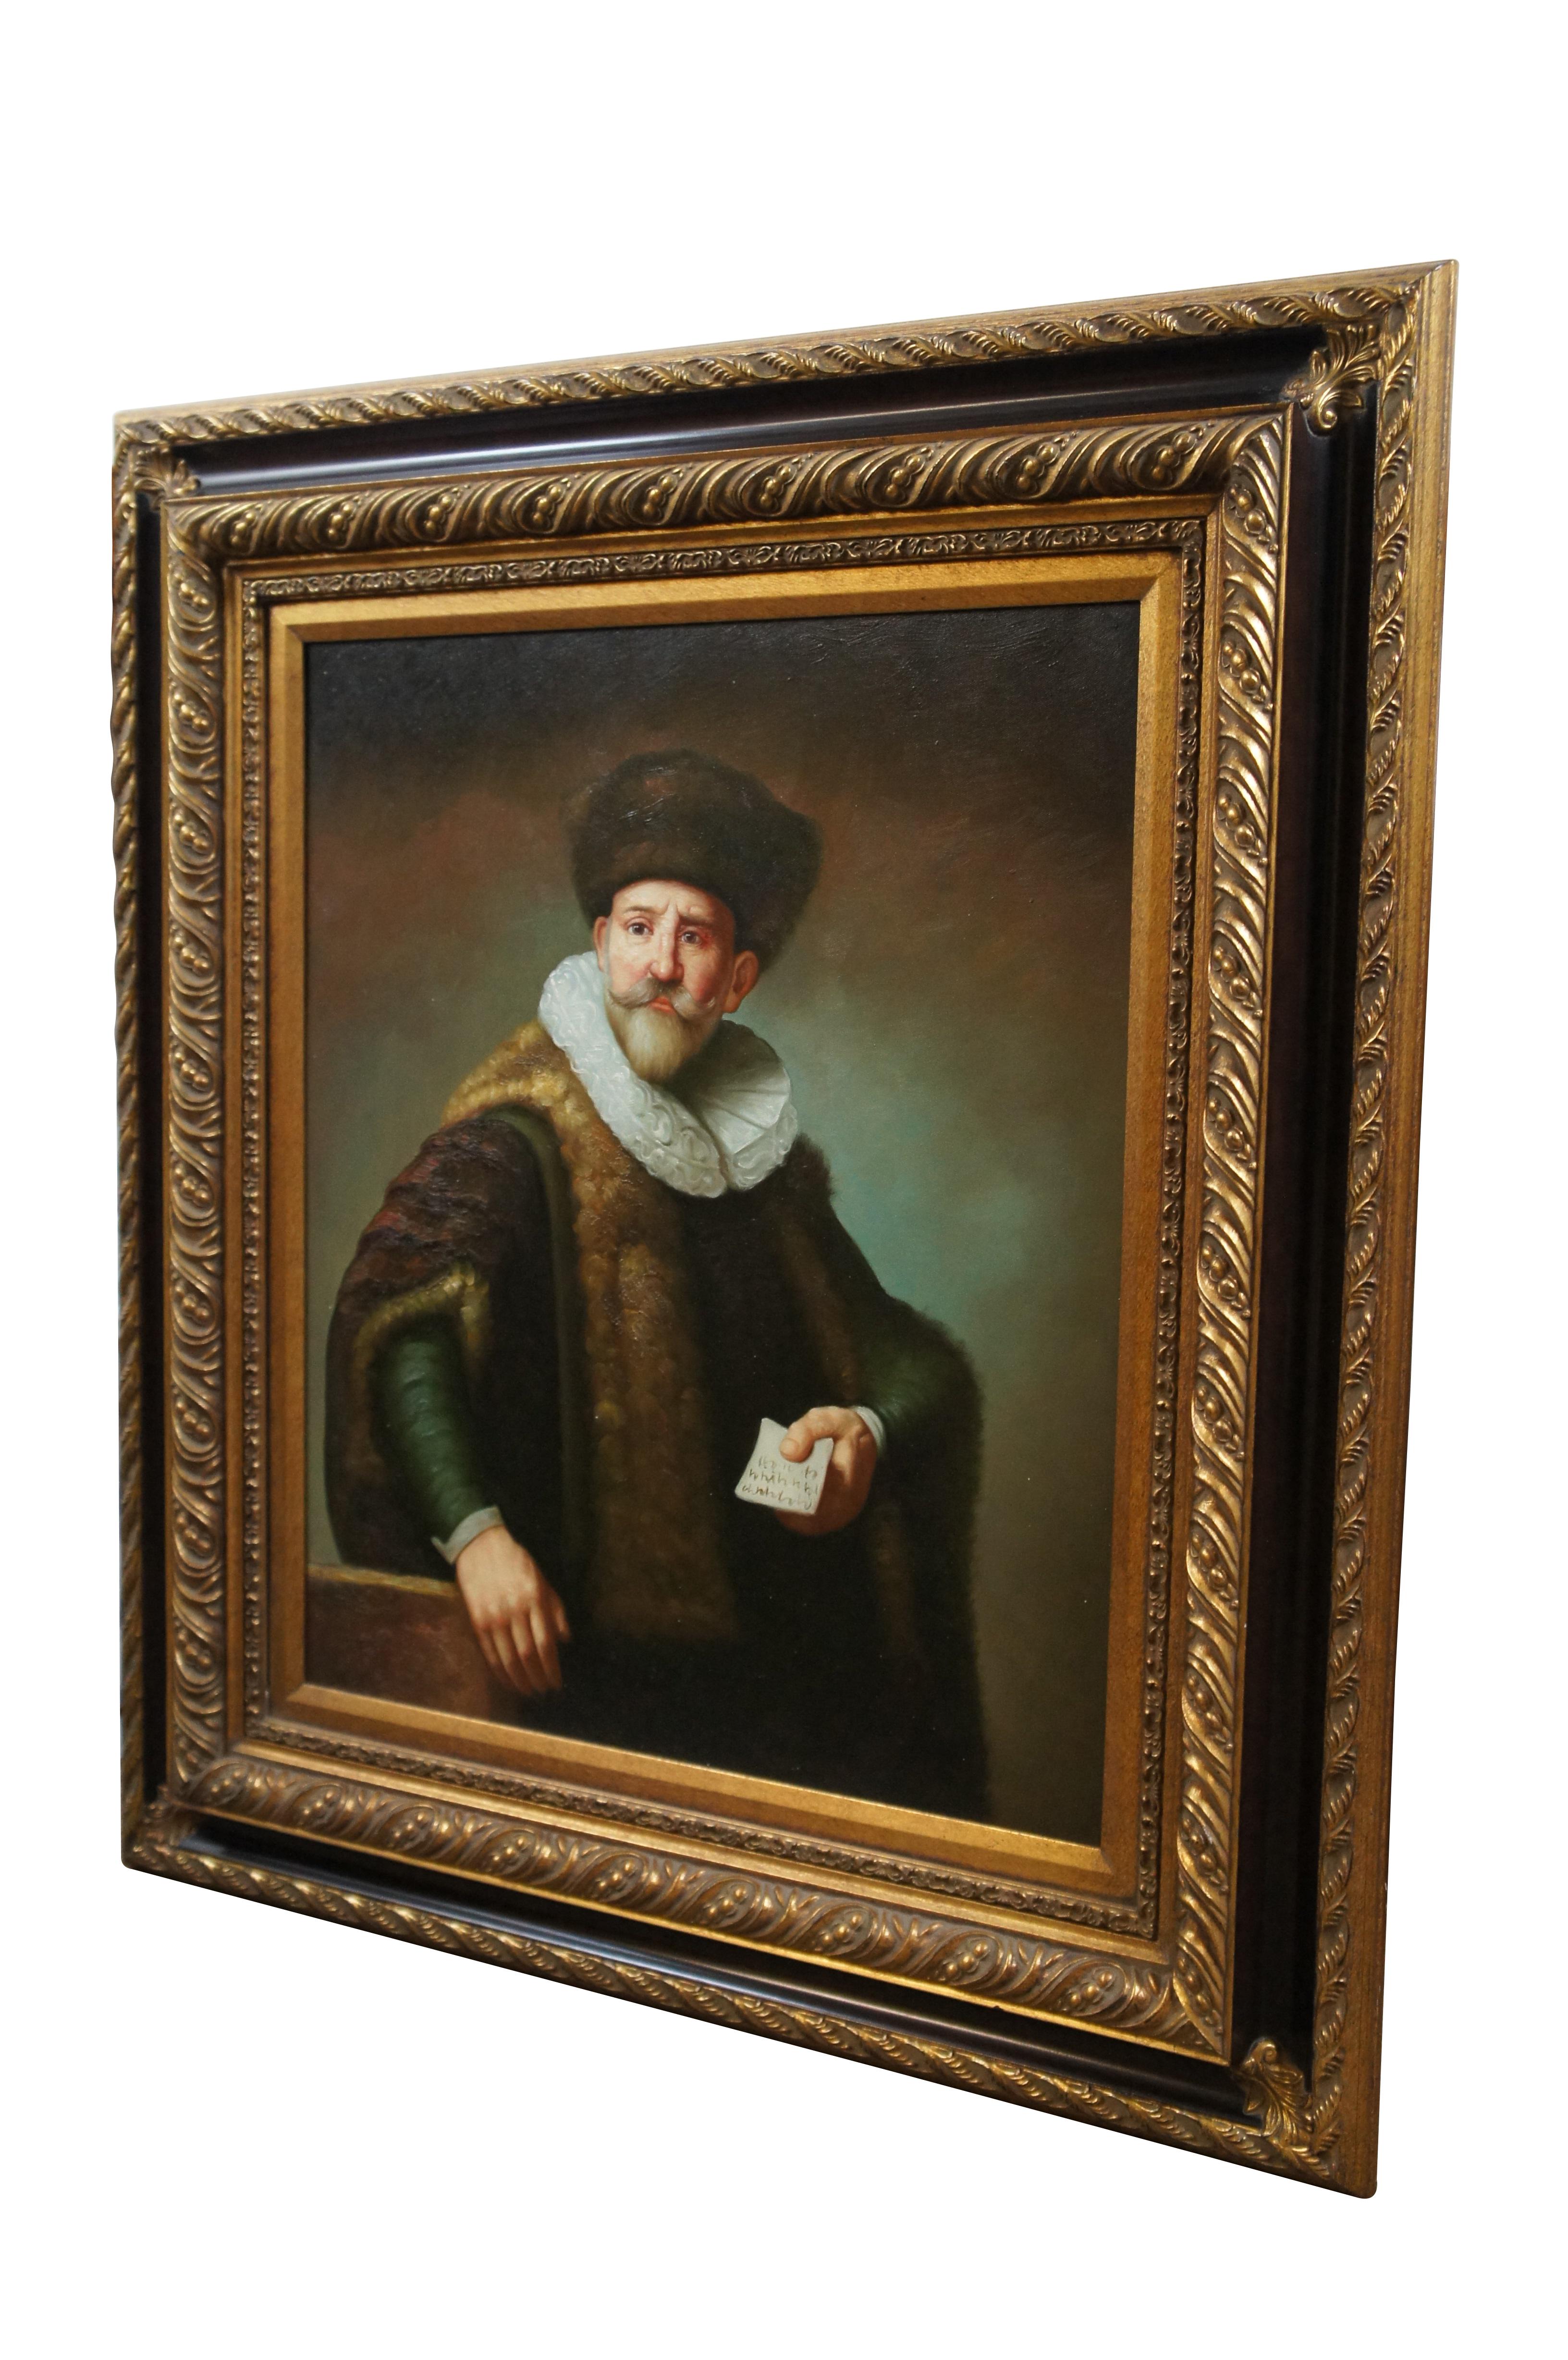 Late 20th century hand painted reproduction oil on canvas painting after “Portrait of Nicolaes Ruts” originally painted in 1631 by Rembrandt van Rijn. This portrait of a fur trader was one of Rembrandt's earliest commissioned pieces and helped